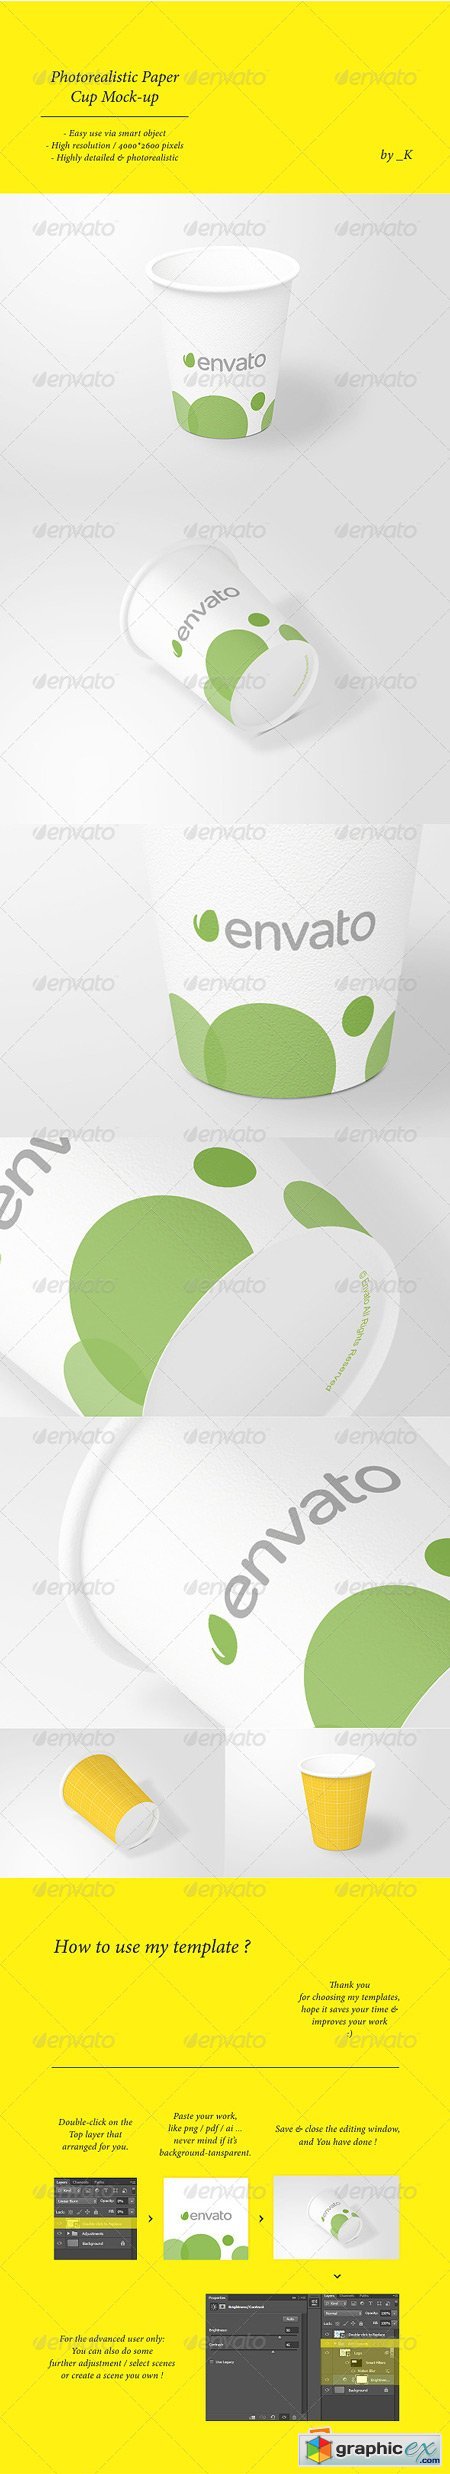 Photorealistic Paper Cup Mock-up